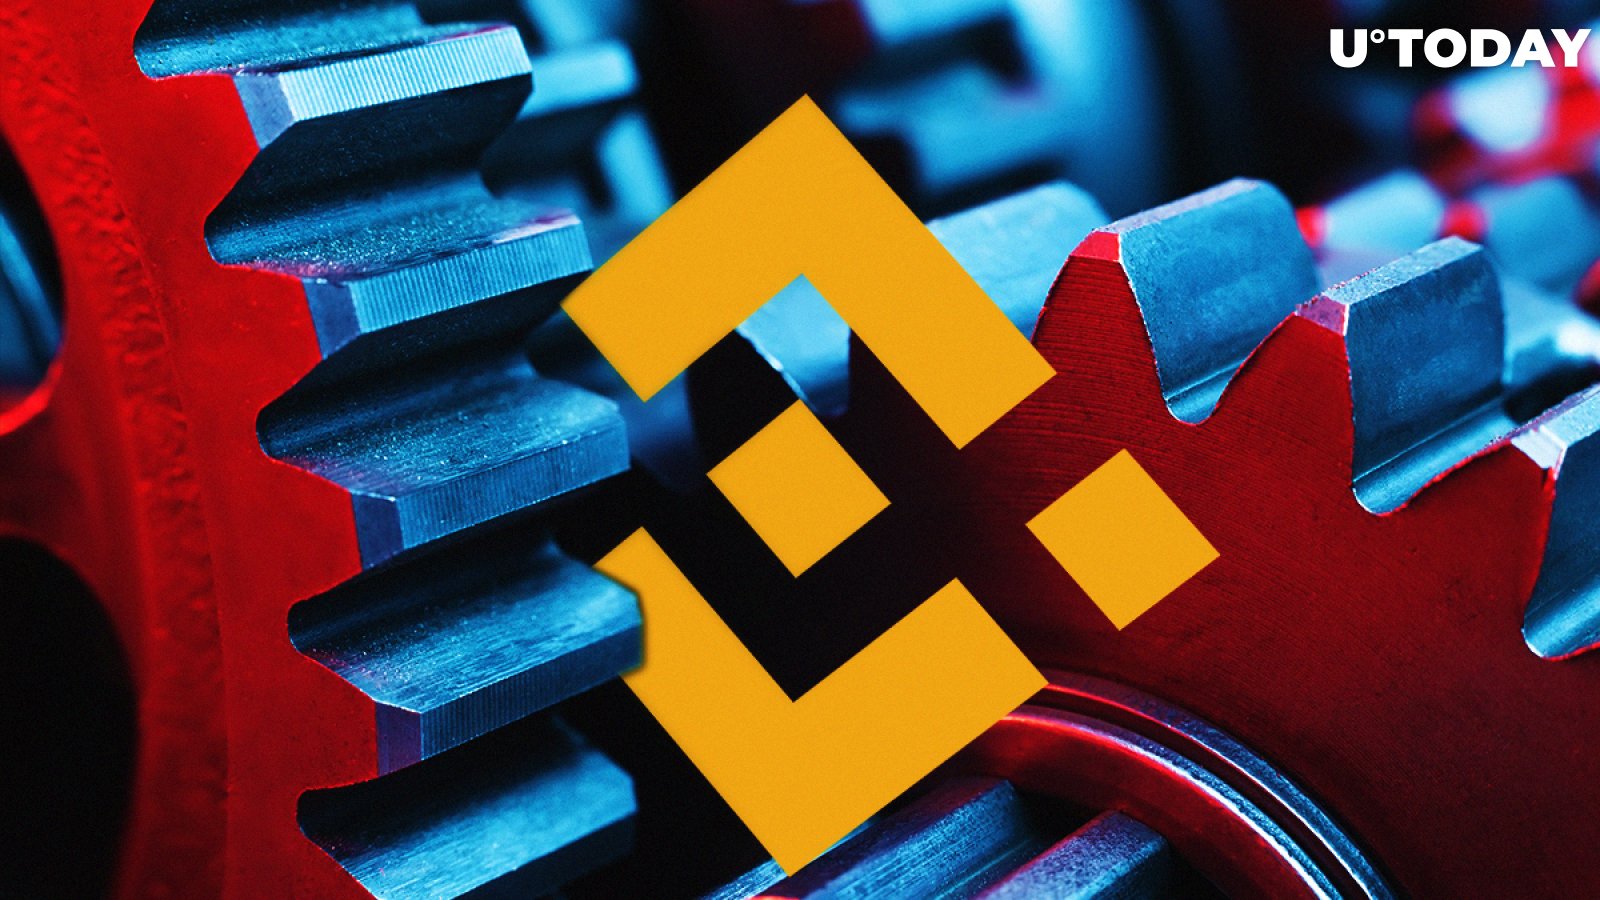 Binance Goes on Unscheduled Maintanance, Community Afraid to Lose Funds